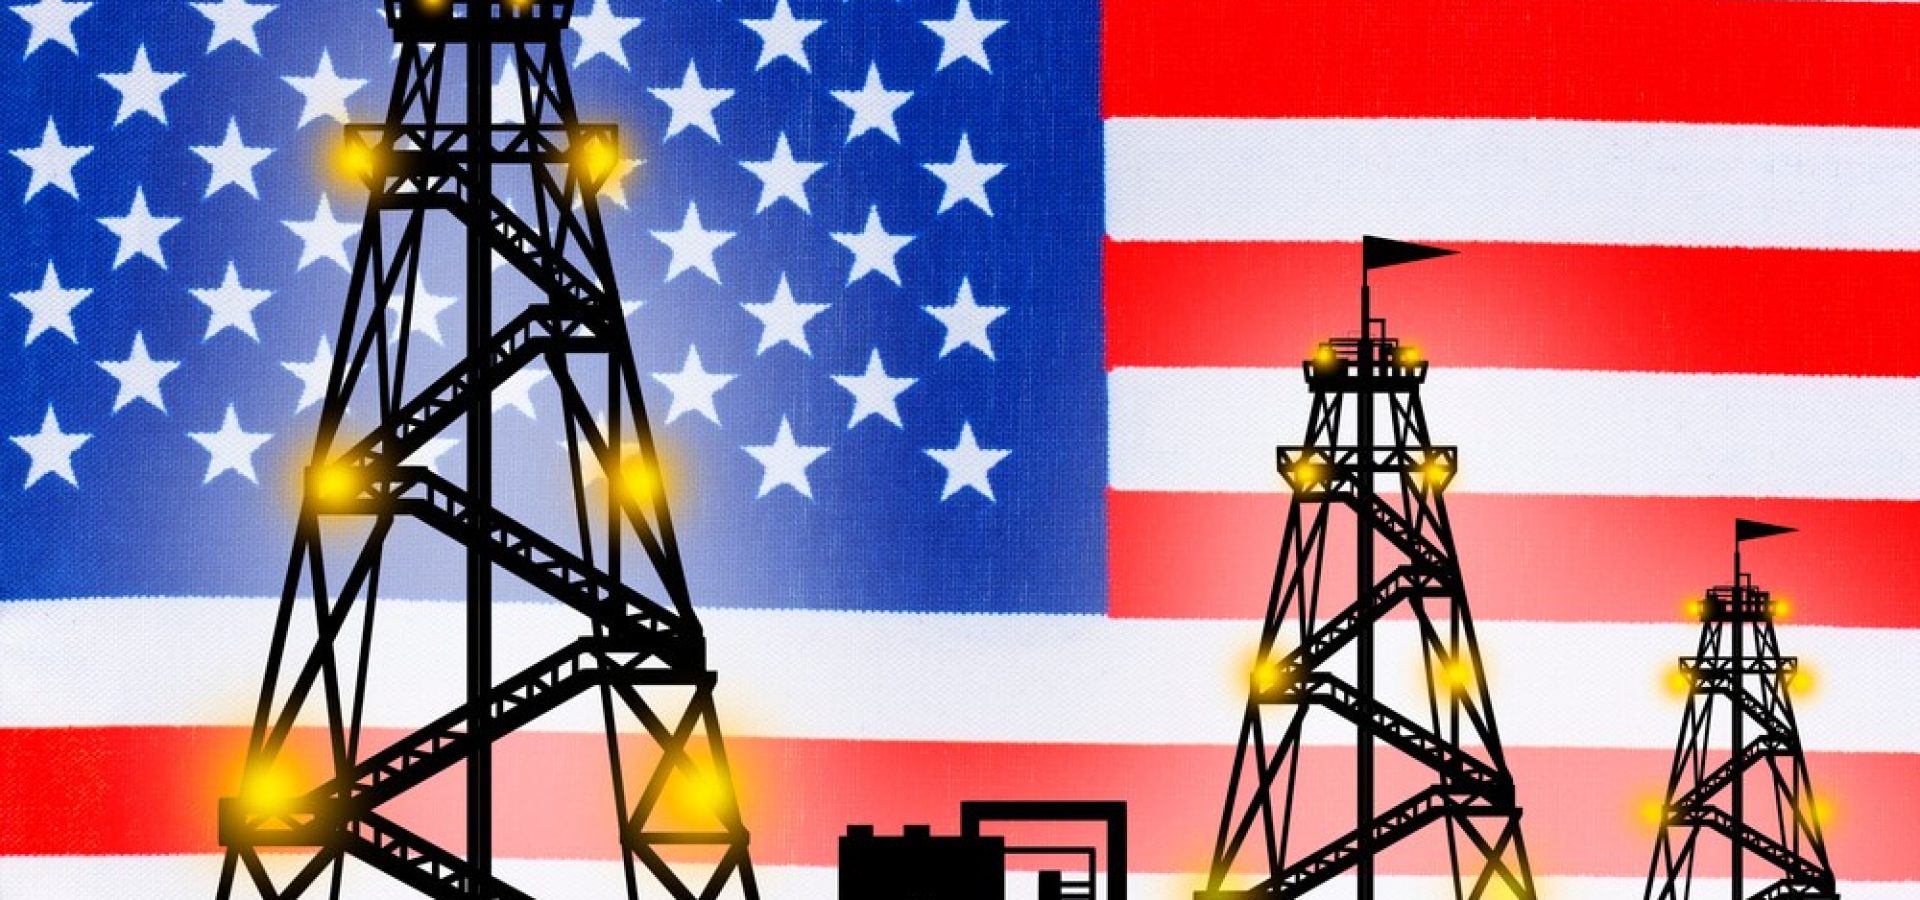 Oil drillings in the United States